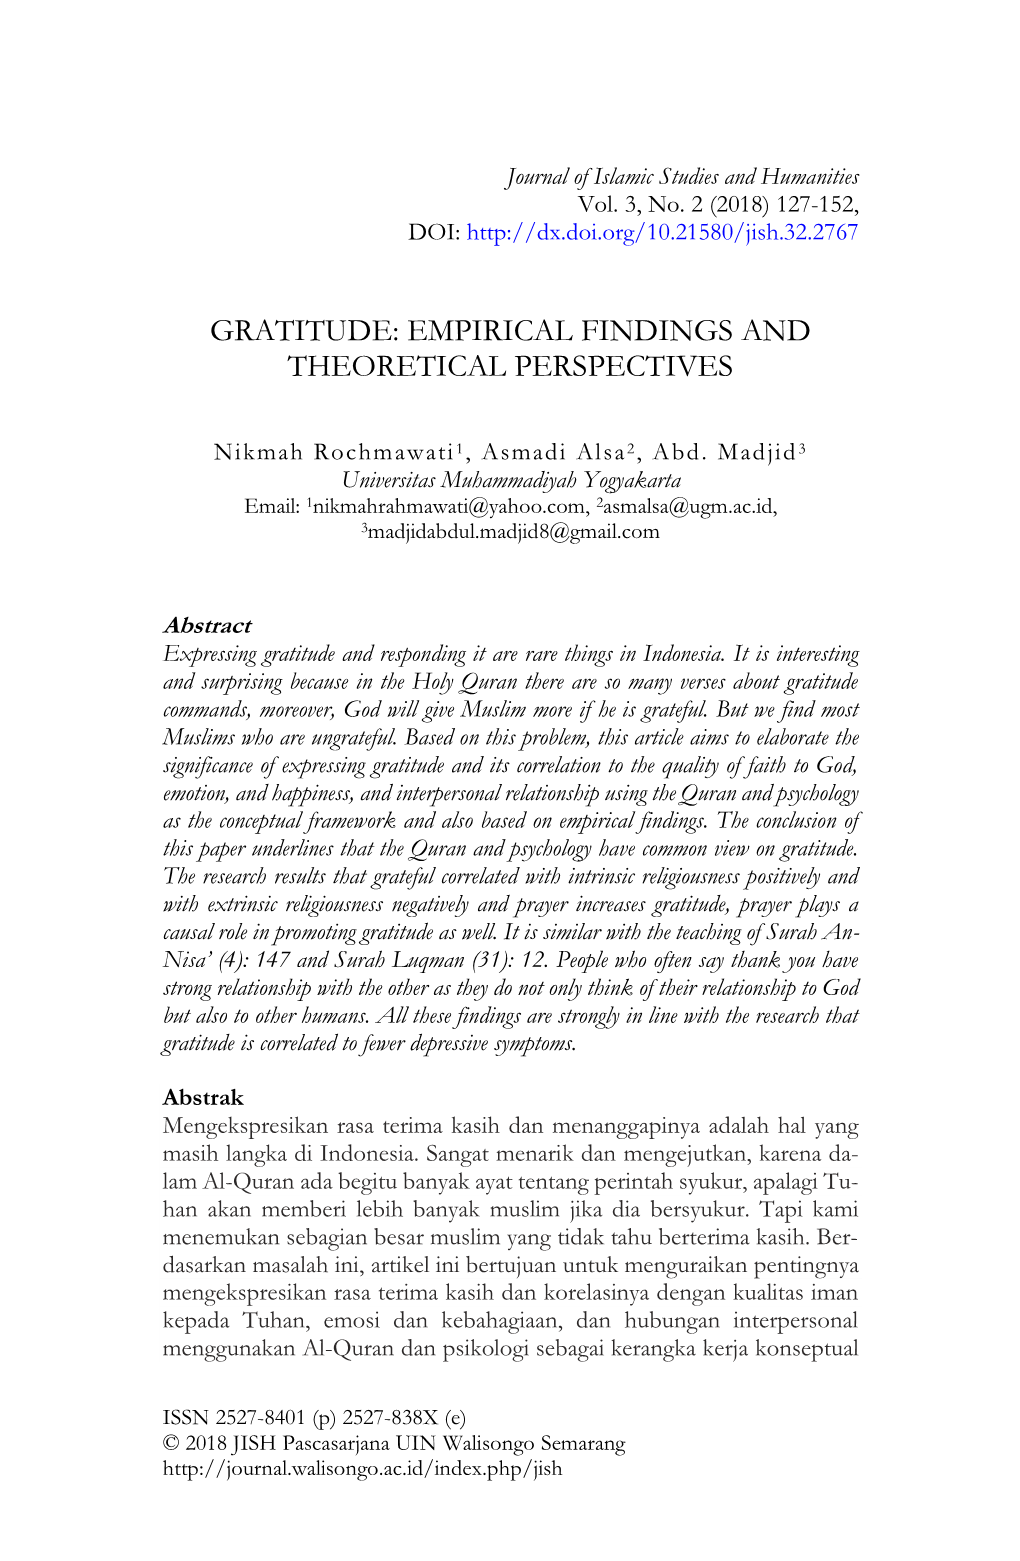 Gratitude: Empirical Findings and Theoretical Perspectives